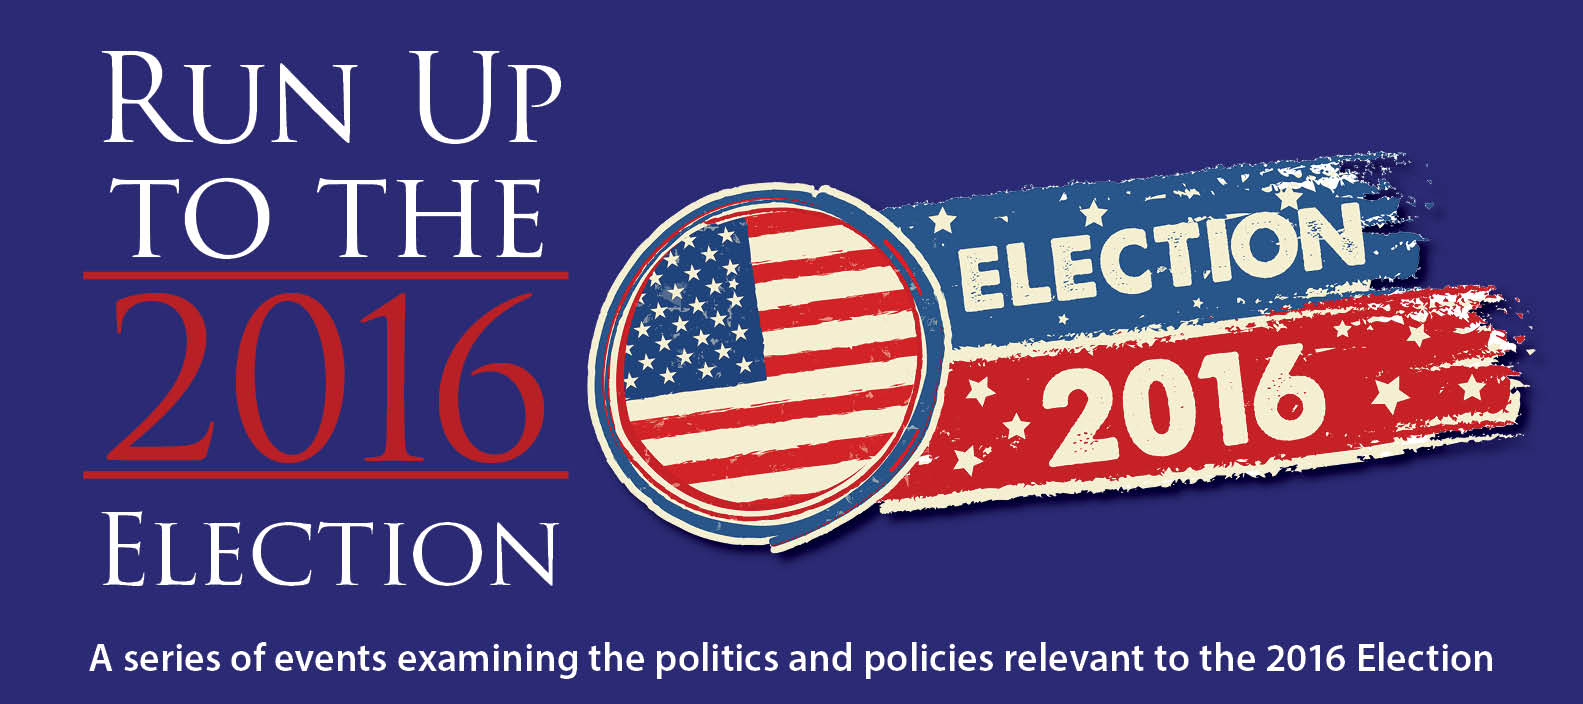 Run Up to the 2016 Election — A series of events examing the politics and policies relevenat to the 2016 election